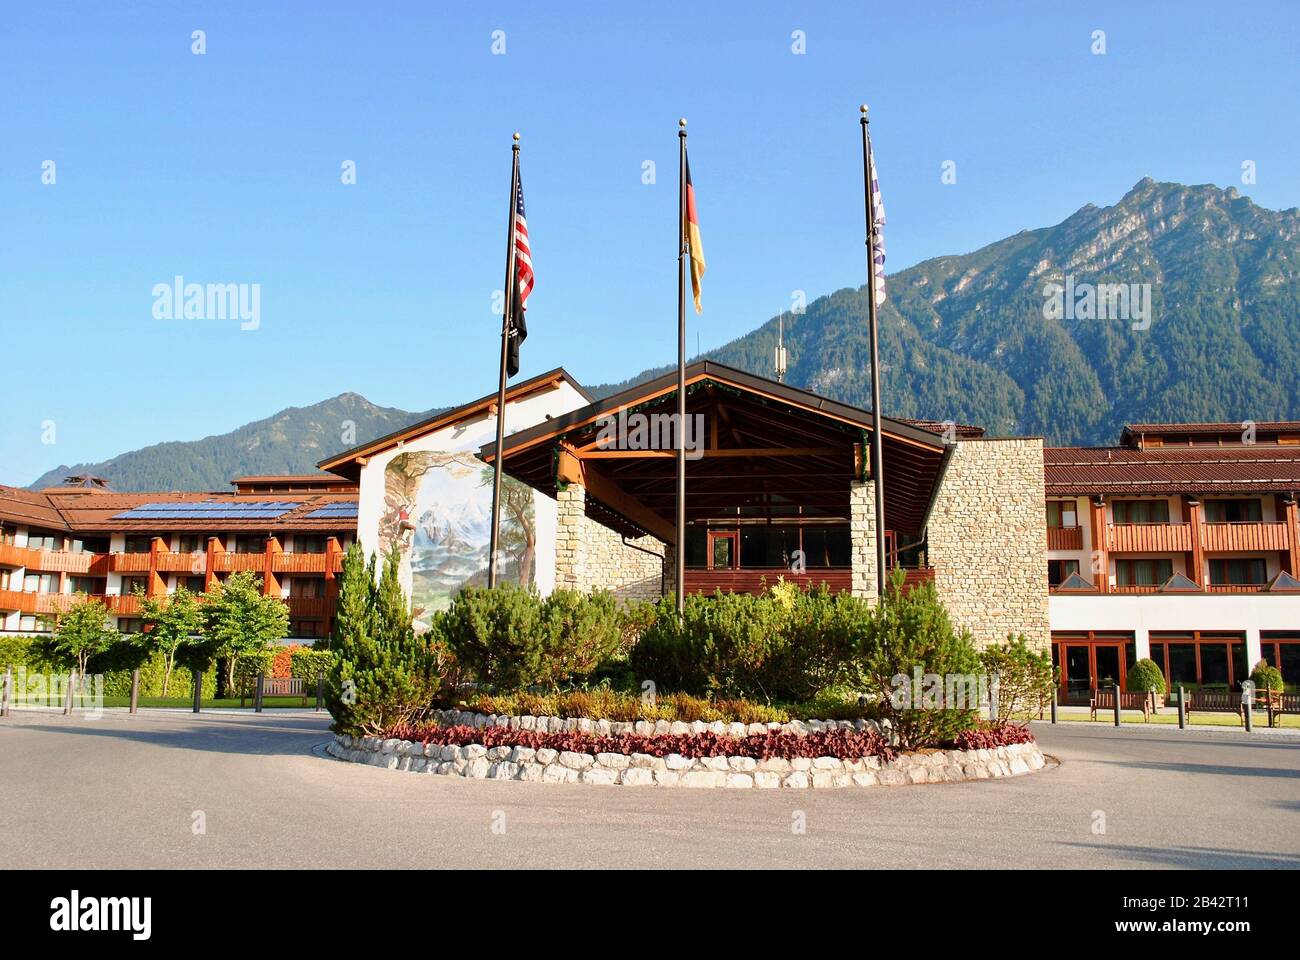 Edelweiss Lodge and Resort serves members of the U.S. Armed Forces and their families in Garmisch-Partenkirchen, Germany. A MWR military facility. Stock Photo